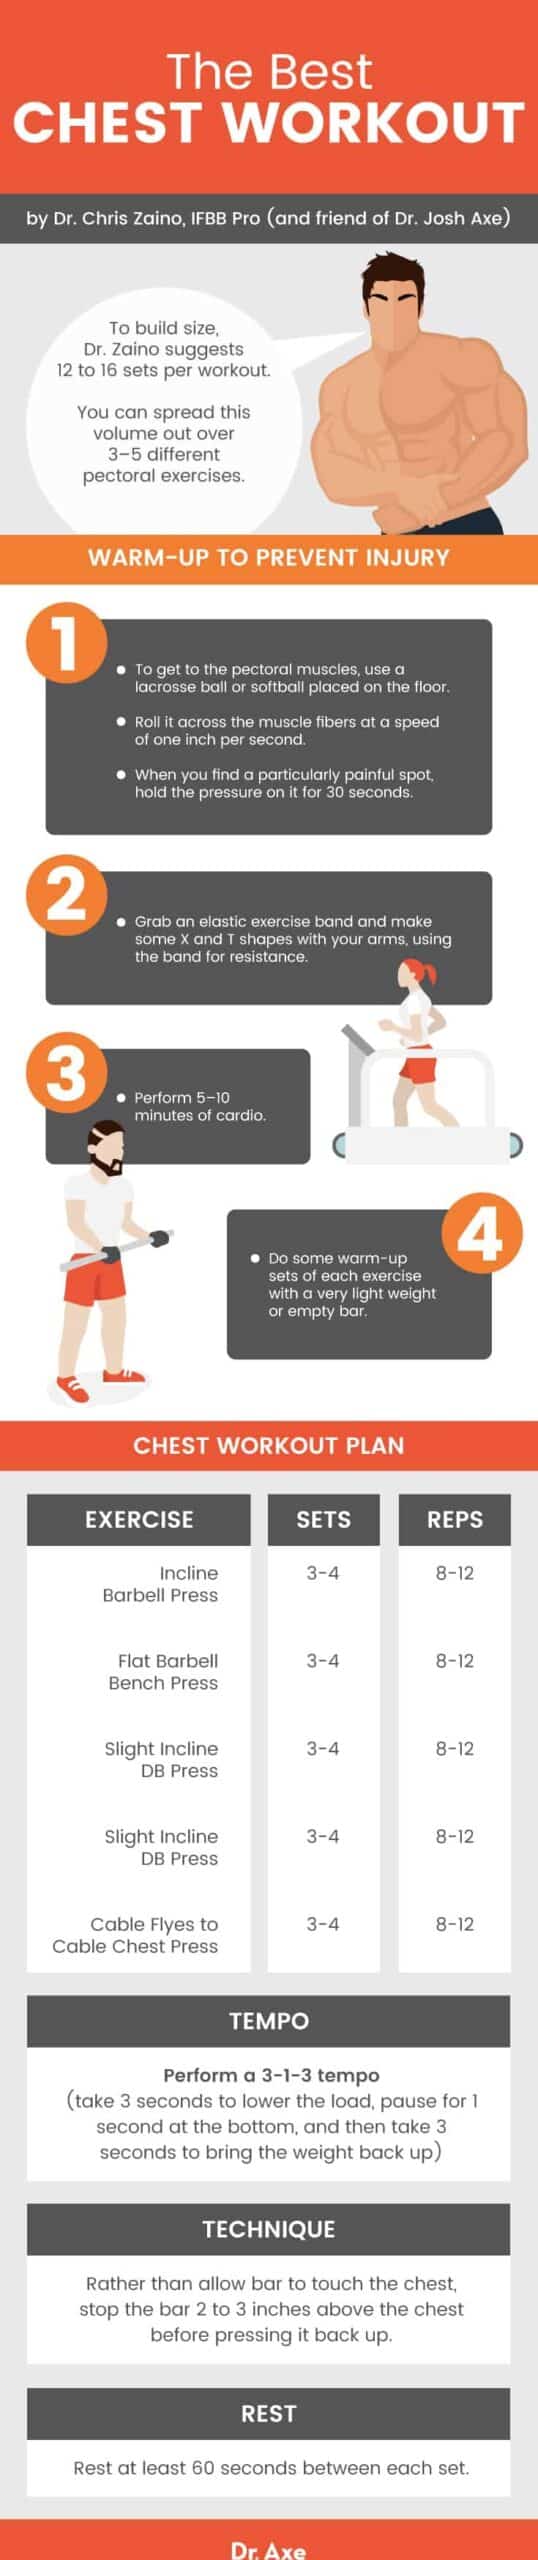 Chest exercises - Dr. Axe